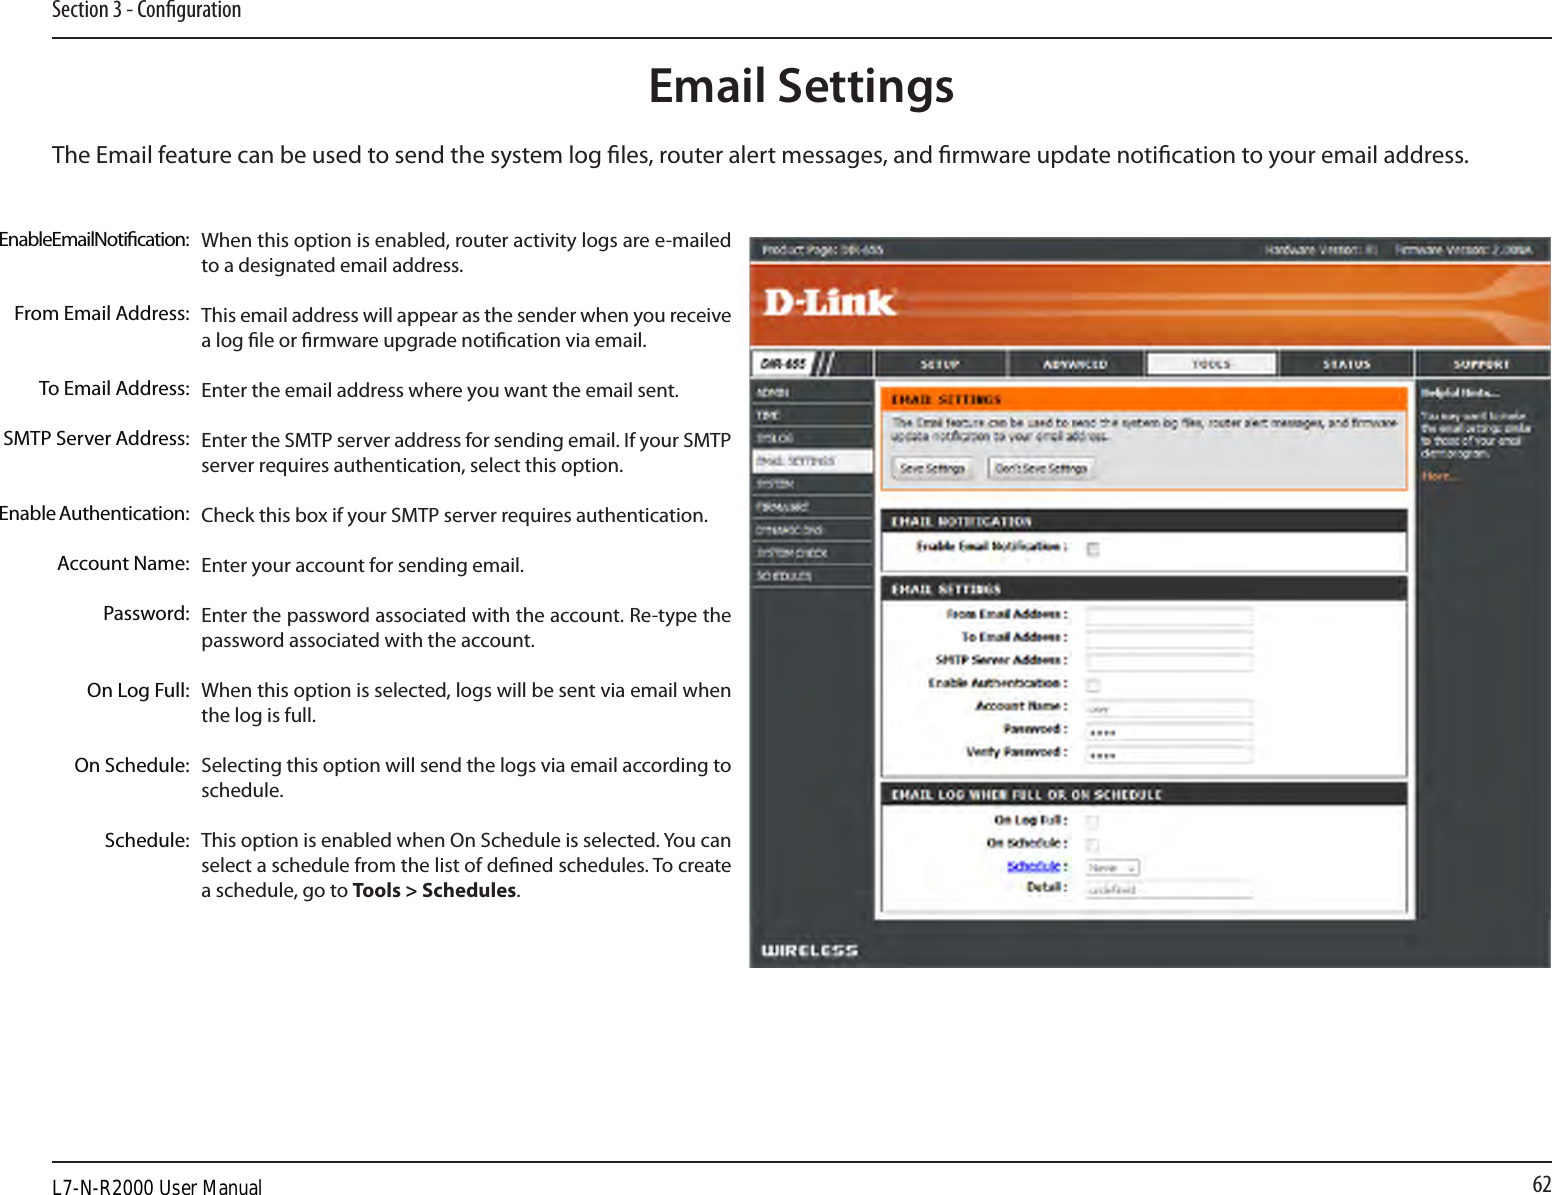 62Section 3 - CongurationEmail SettingsThe Email feature can be used to send the system log les, router alert messages, and rmware update notication to your email address. Enable Email Notication: From Email Address:To Email Address:SMTP Server Address:Enable Authentication:Account Name:Password:On Log Full:On Schedule:Schedule:When this option is enabled, router activity logs are e-mailed to a designated email address.This email address will appear as the sender when you receive a log le or rmware upgrade notication via email.Enter the email address where you want the email sent. Enter the SMTP server address for sending email. If your SMTP server requires authentication, select this option.Check this box if your SMTP server requires authentication. Enter your account for sending email.Enter the password associated with the account. Re-type the password associated with the account.When this option is selected, logs will be sent via email when the log is full.Selecting this option will send the logs via email according to schedule.This option is enabled when On Schedule is selected. You can select a schedule from the list of dened schedules. To create a schedule, go to Tools &gt; Schedules.L7-N-R2000 User Manual